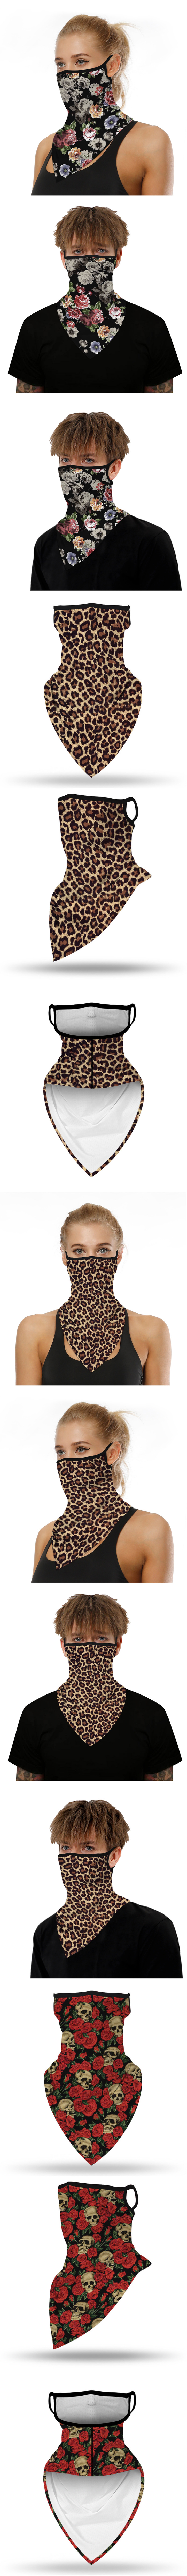 Digital-Printed-Polyester-Breathable-Face-Cover-Windproof-Sun-UV-Protection-Neck-Gaiter-Dustproof-He-1677735-2